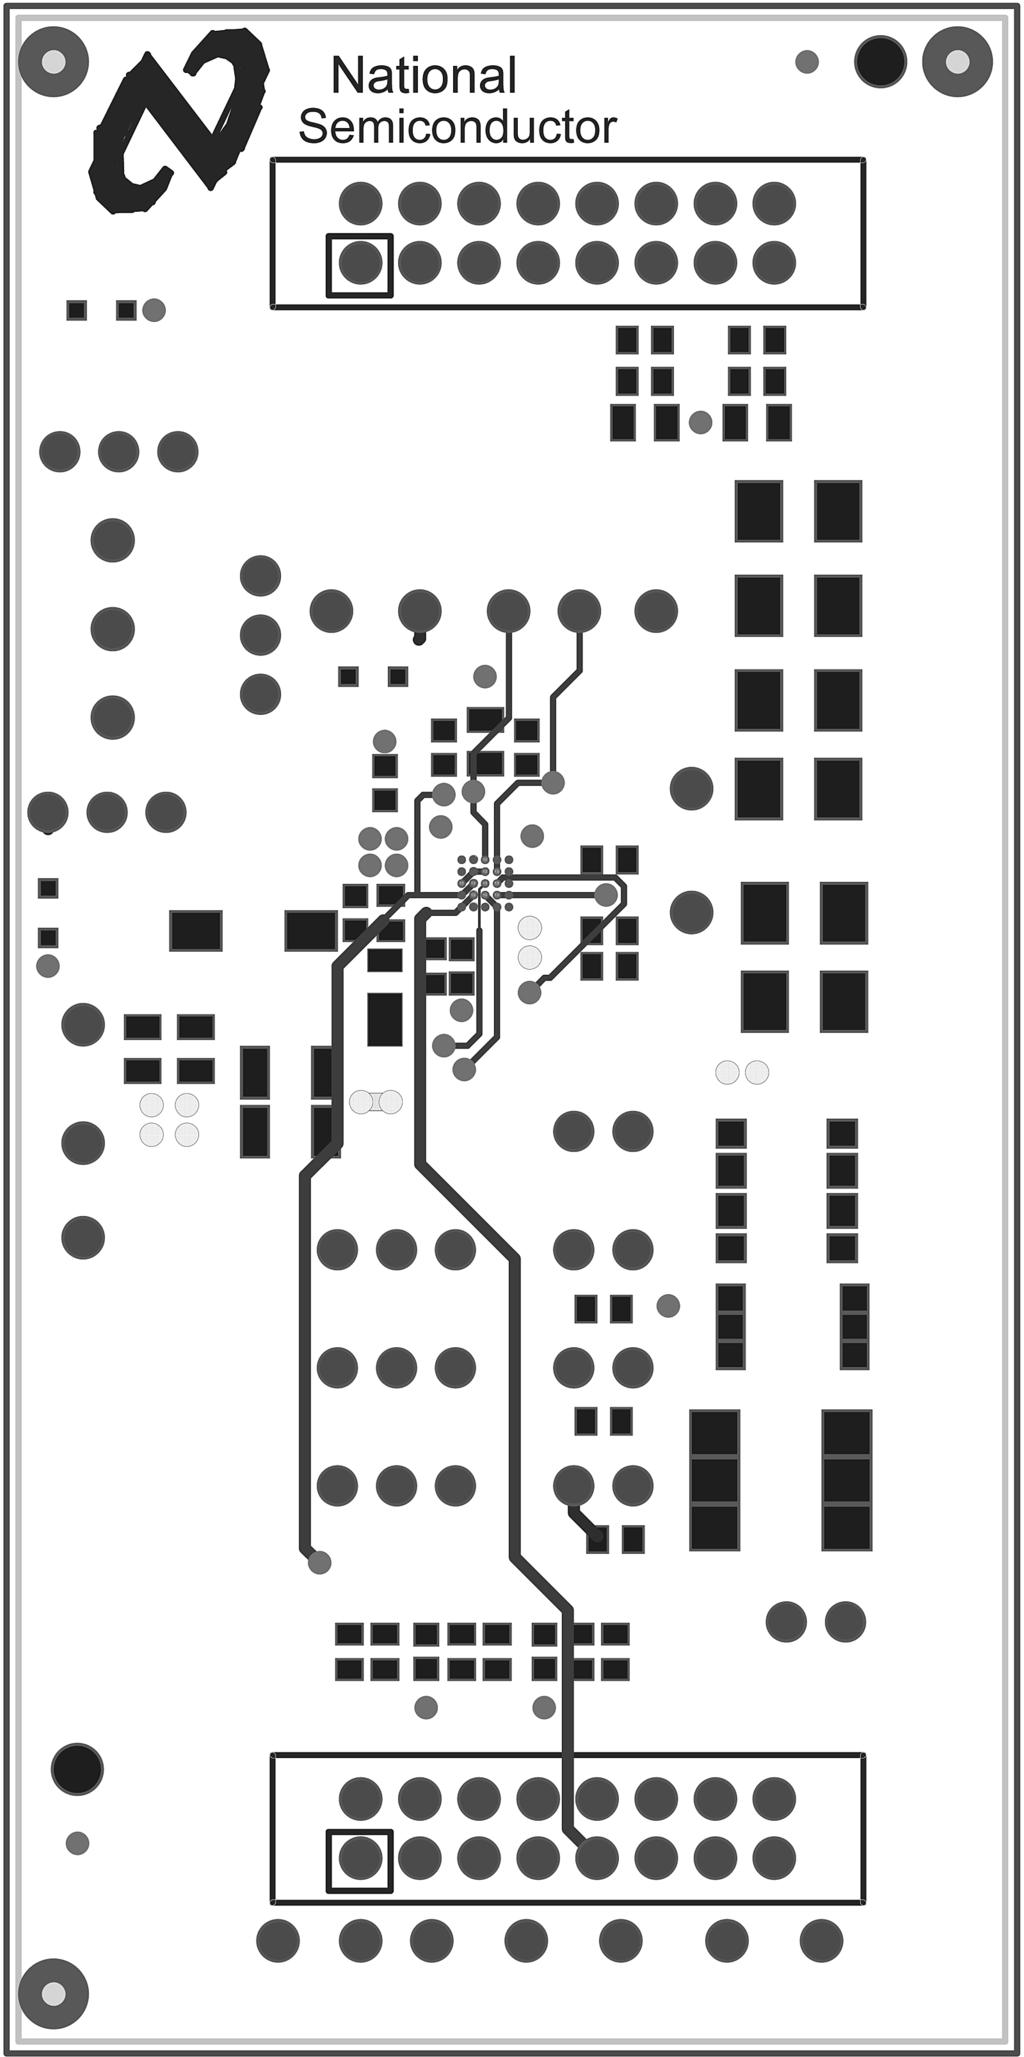 20198210 Fig. 12 Lp5526 Evaluation Board Layer 1 (Top, Signal).